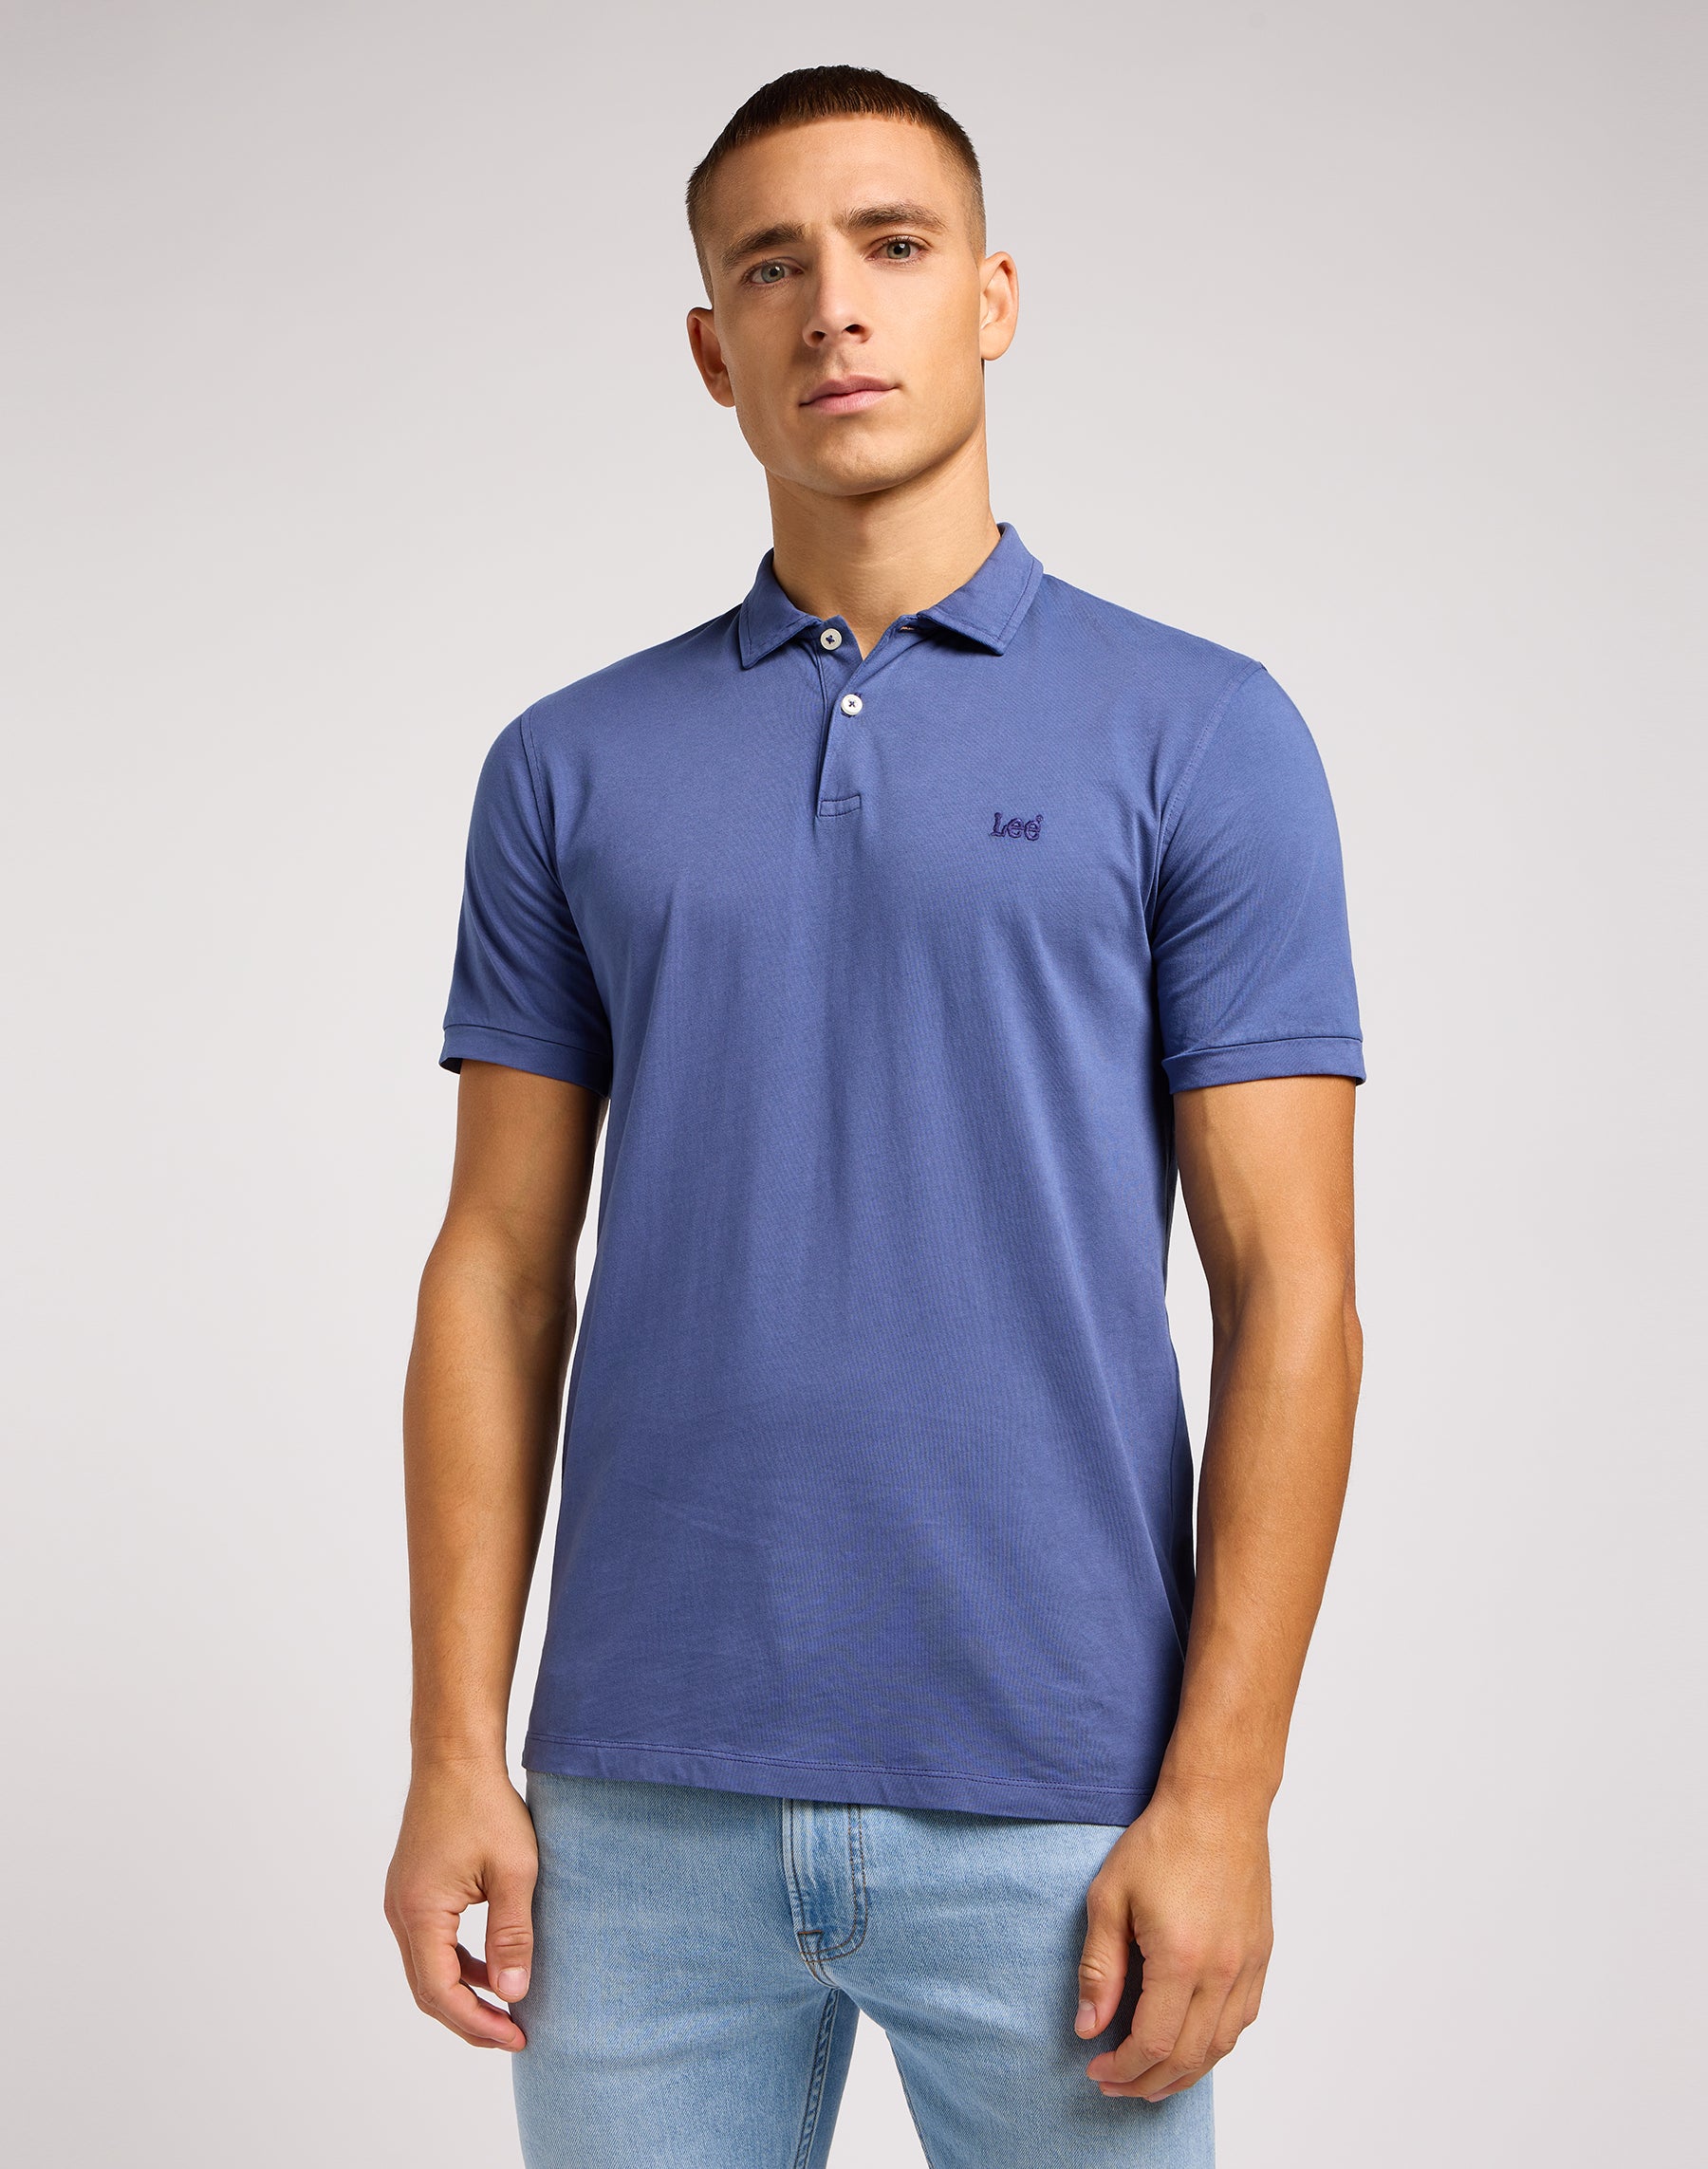 Jersey Polo in Surf Blue Polos Lee   